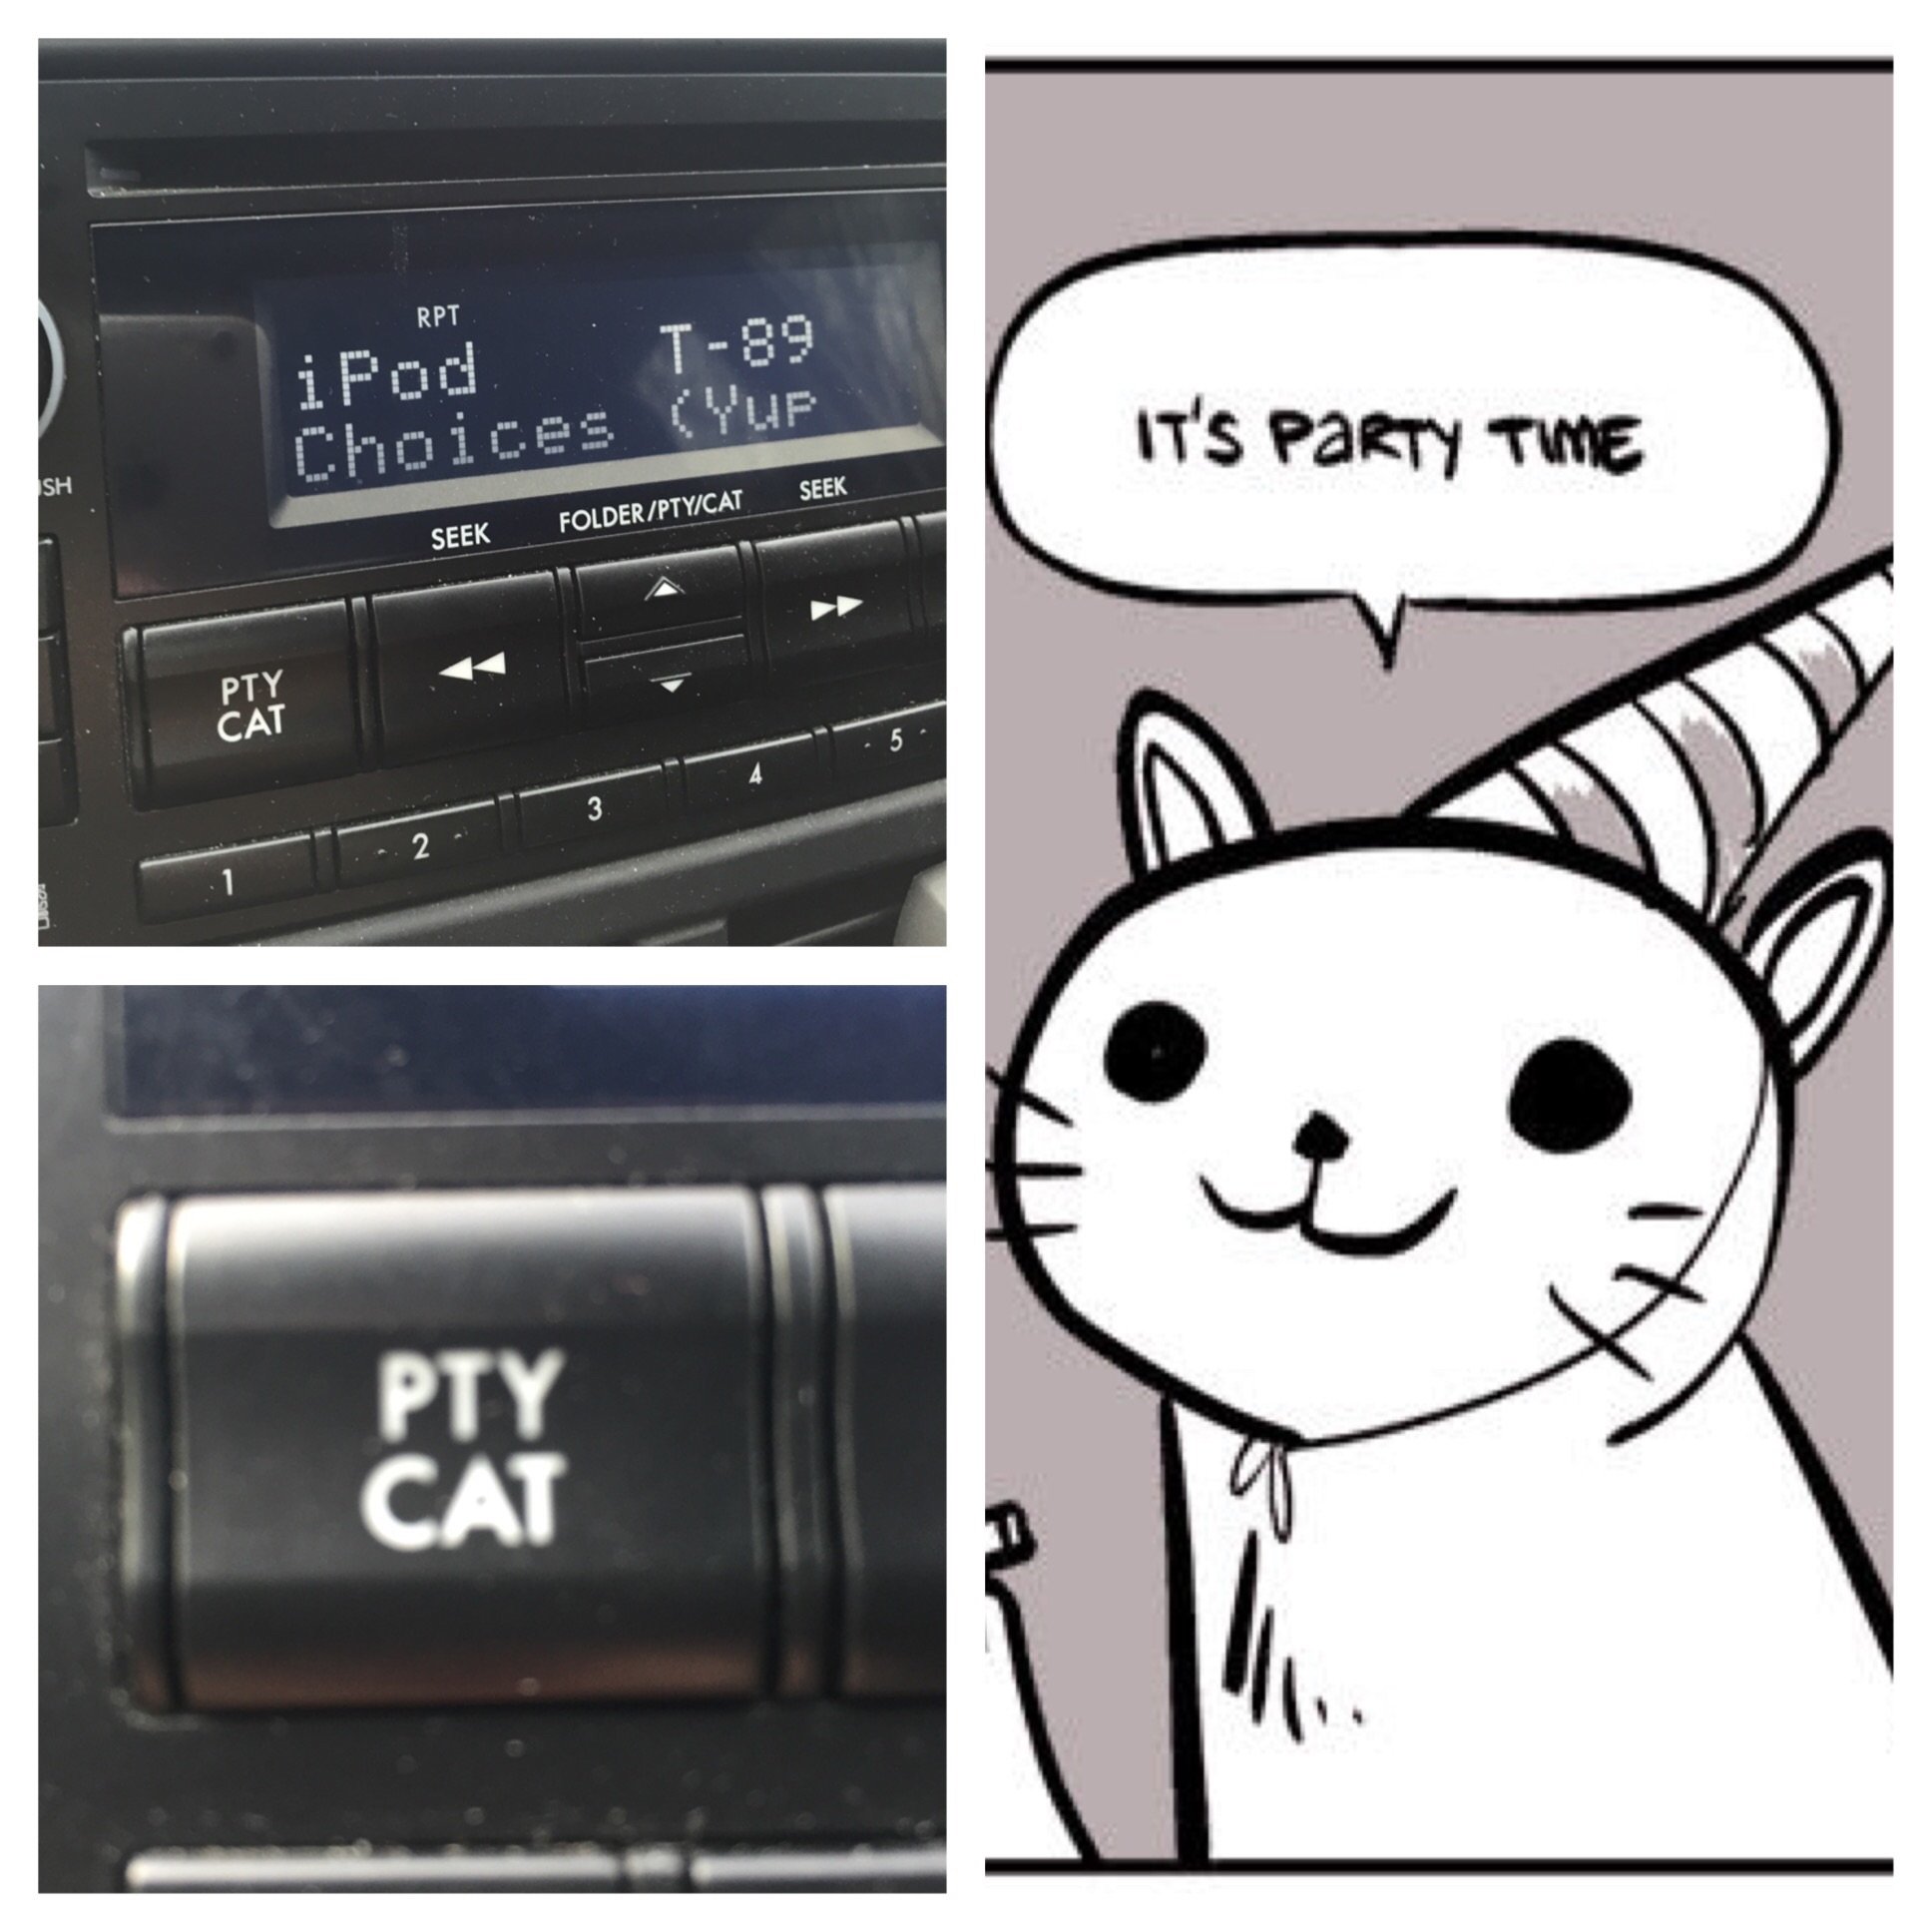 Pty Cat time.